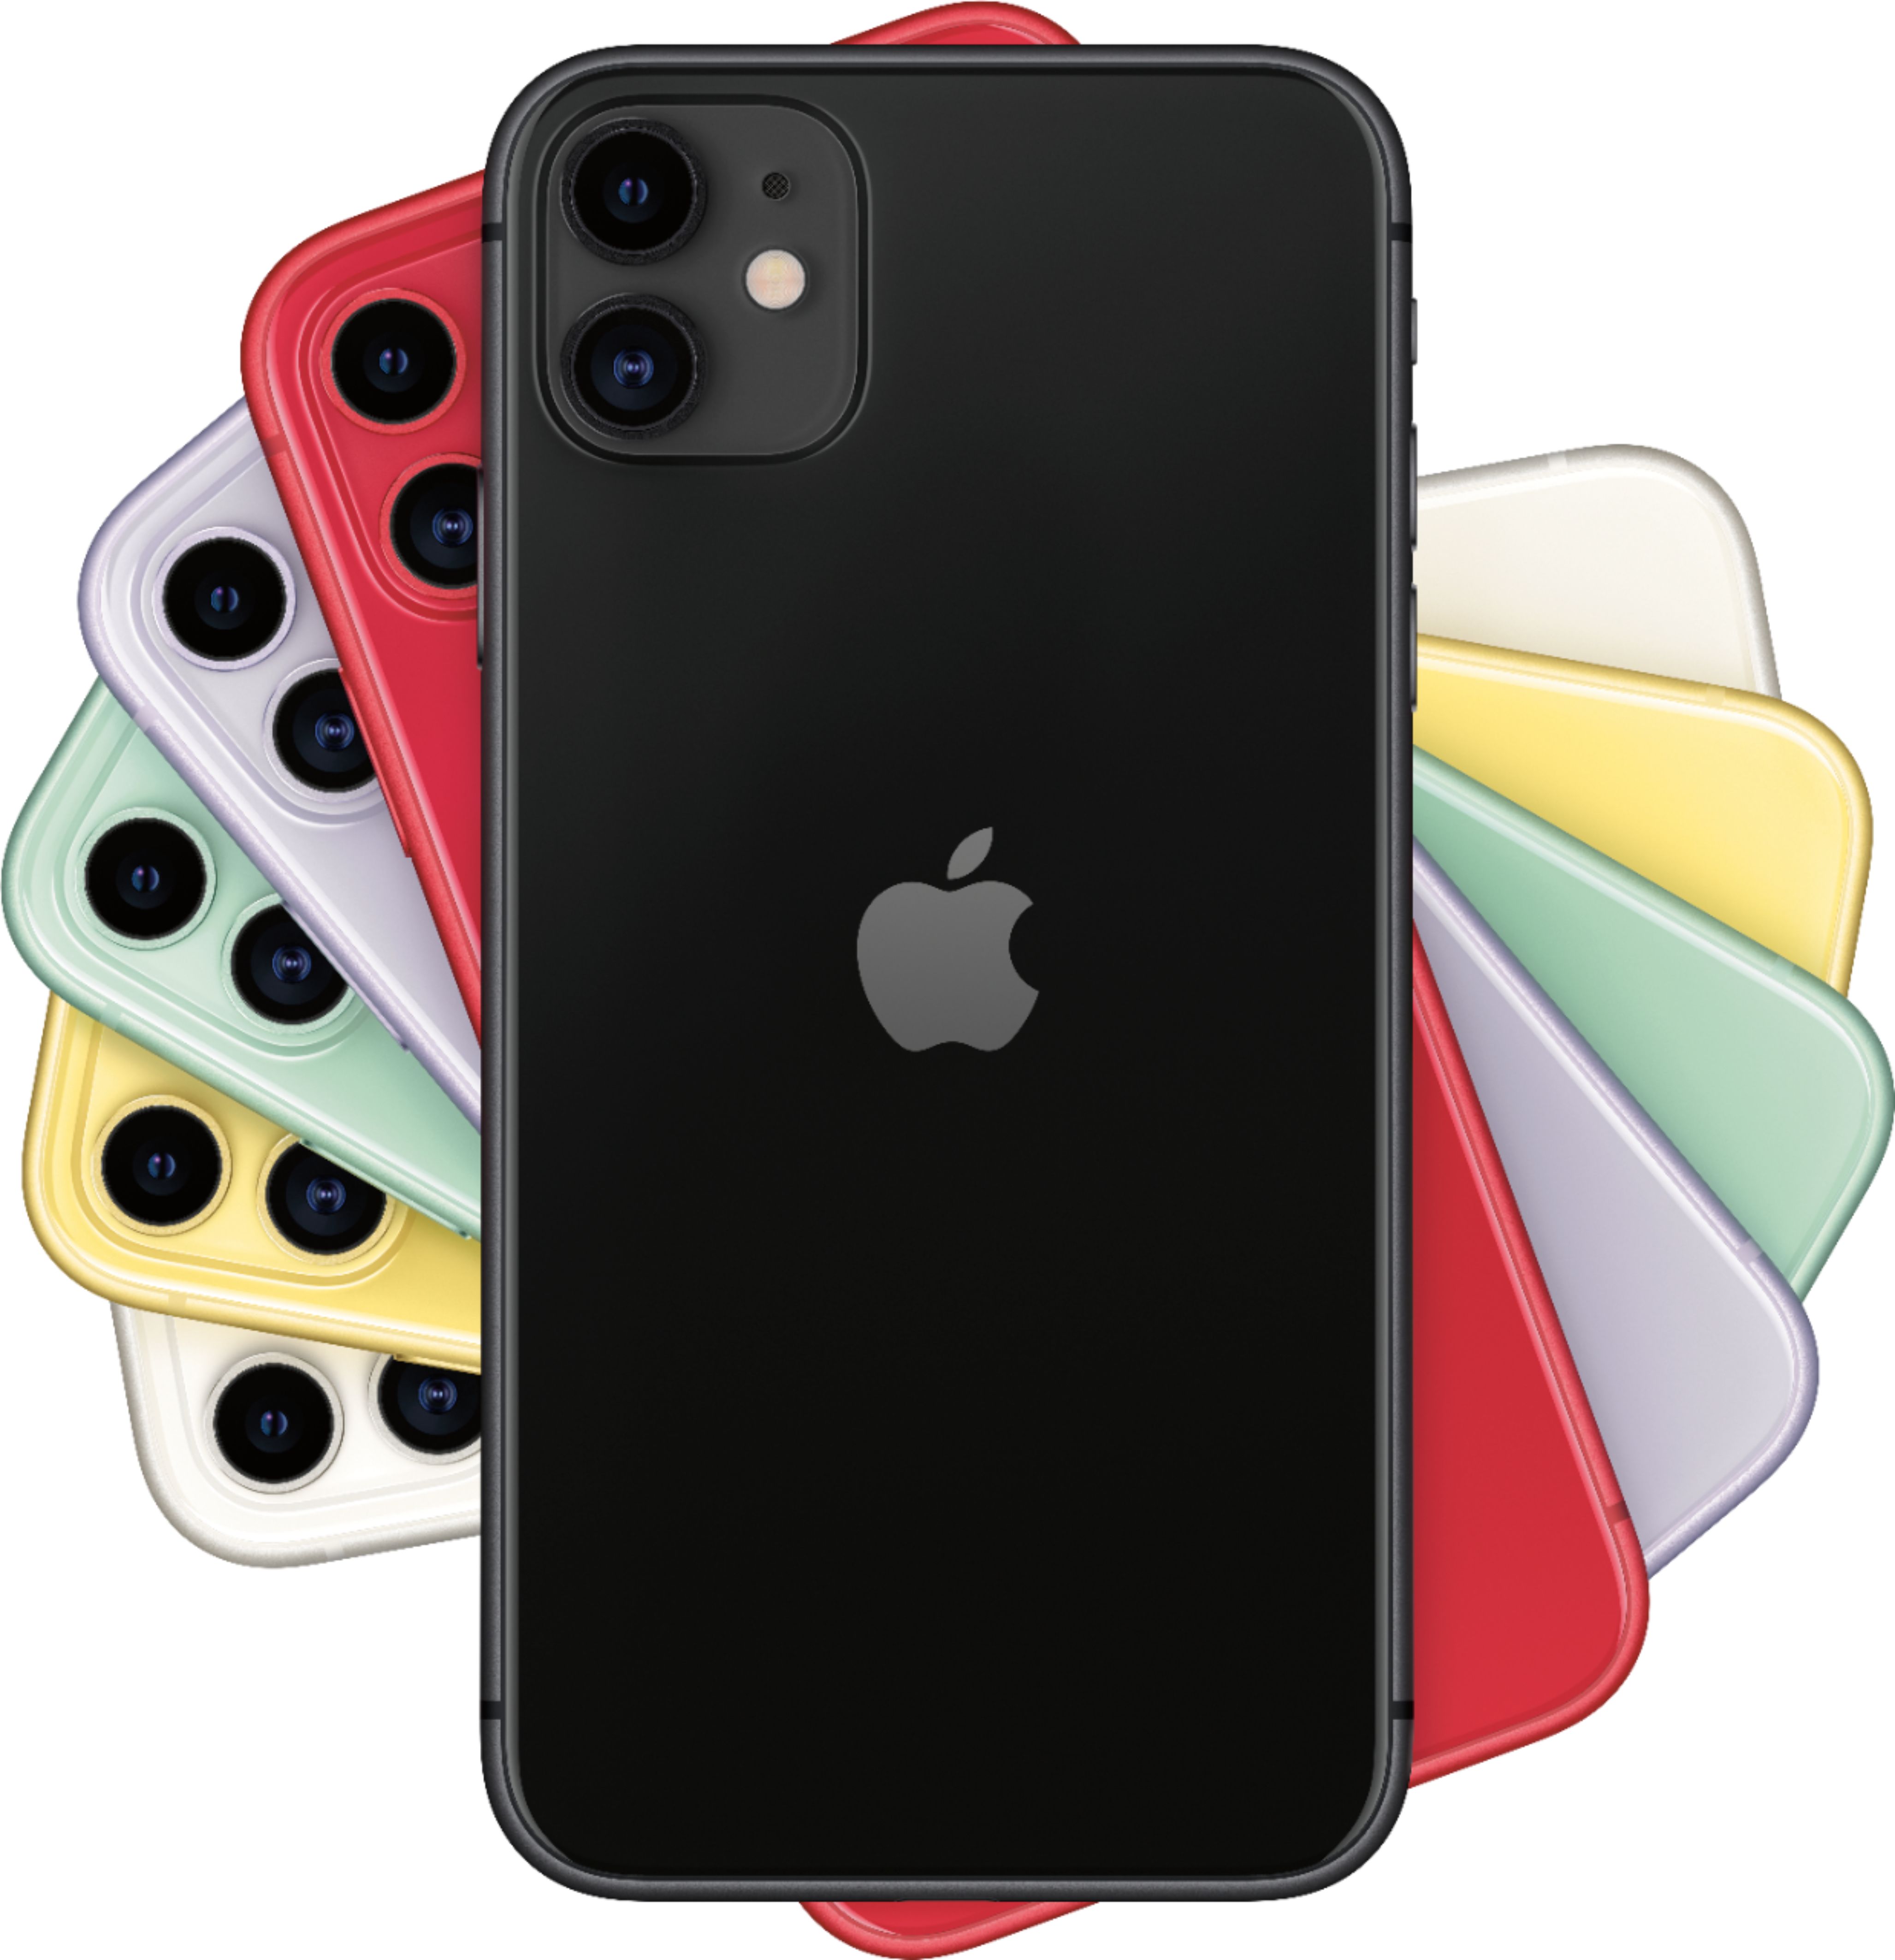 Iphone 12 Iphone 11 Price In India 64gb 2018 Promo Codes For Roblox Robux - gb blaster roblox